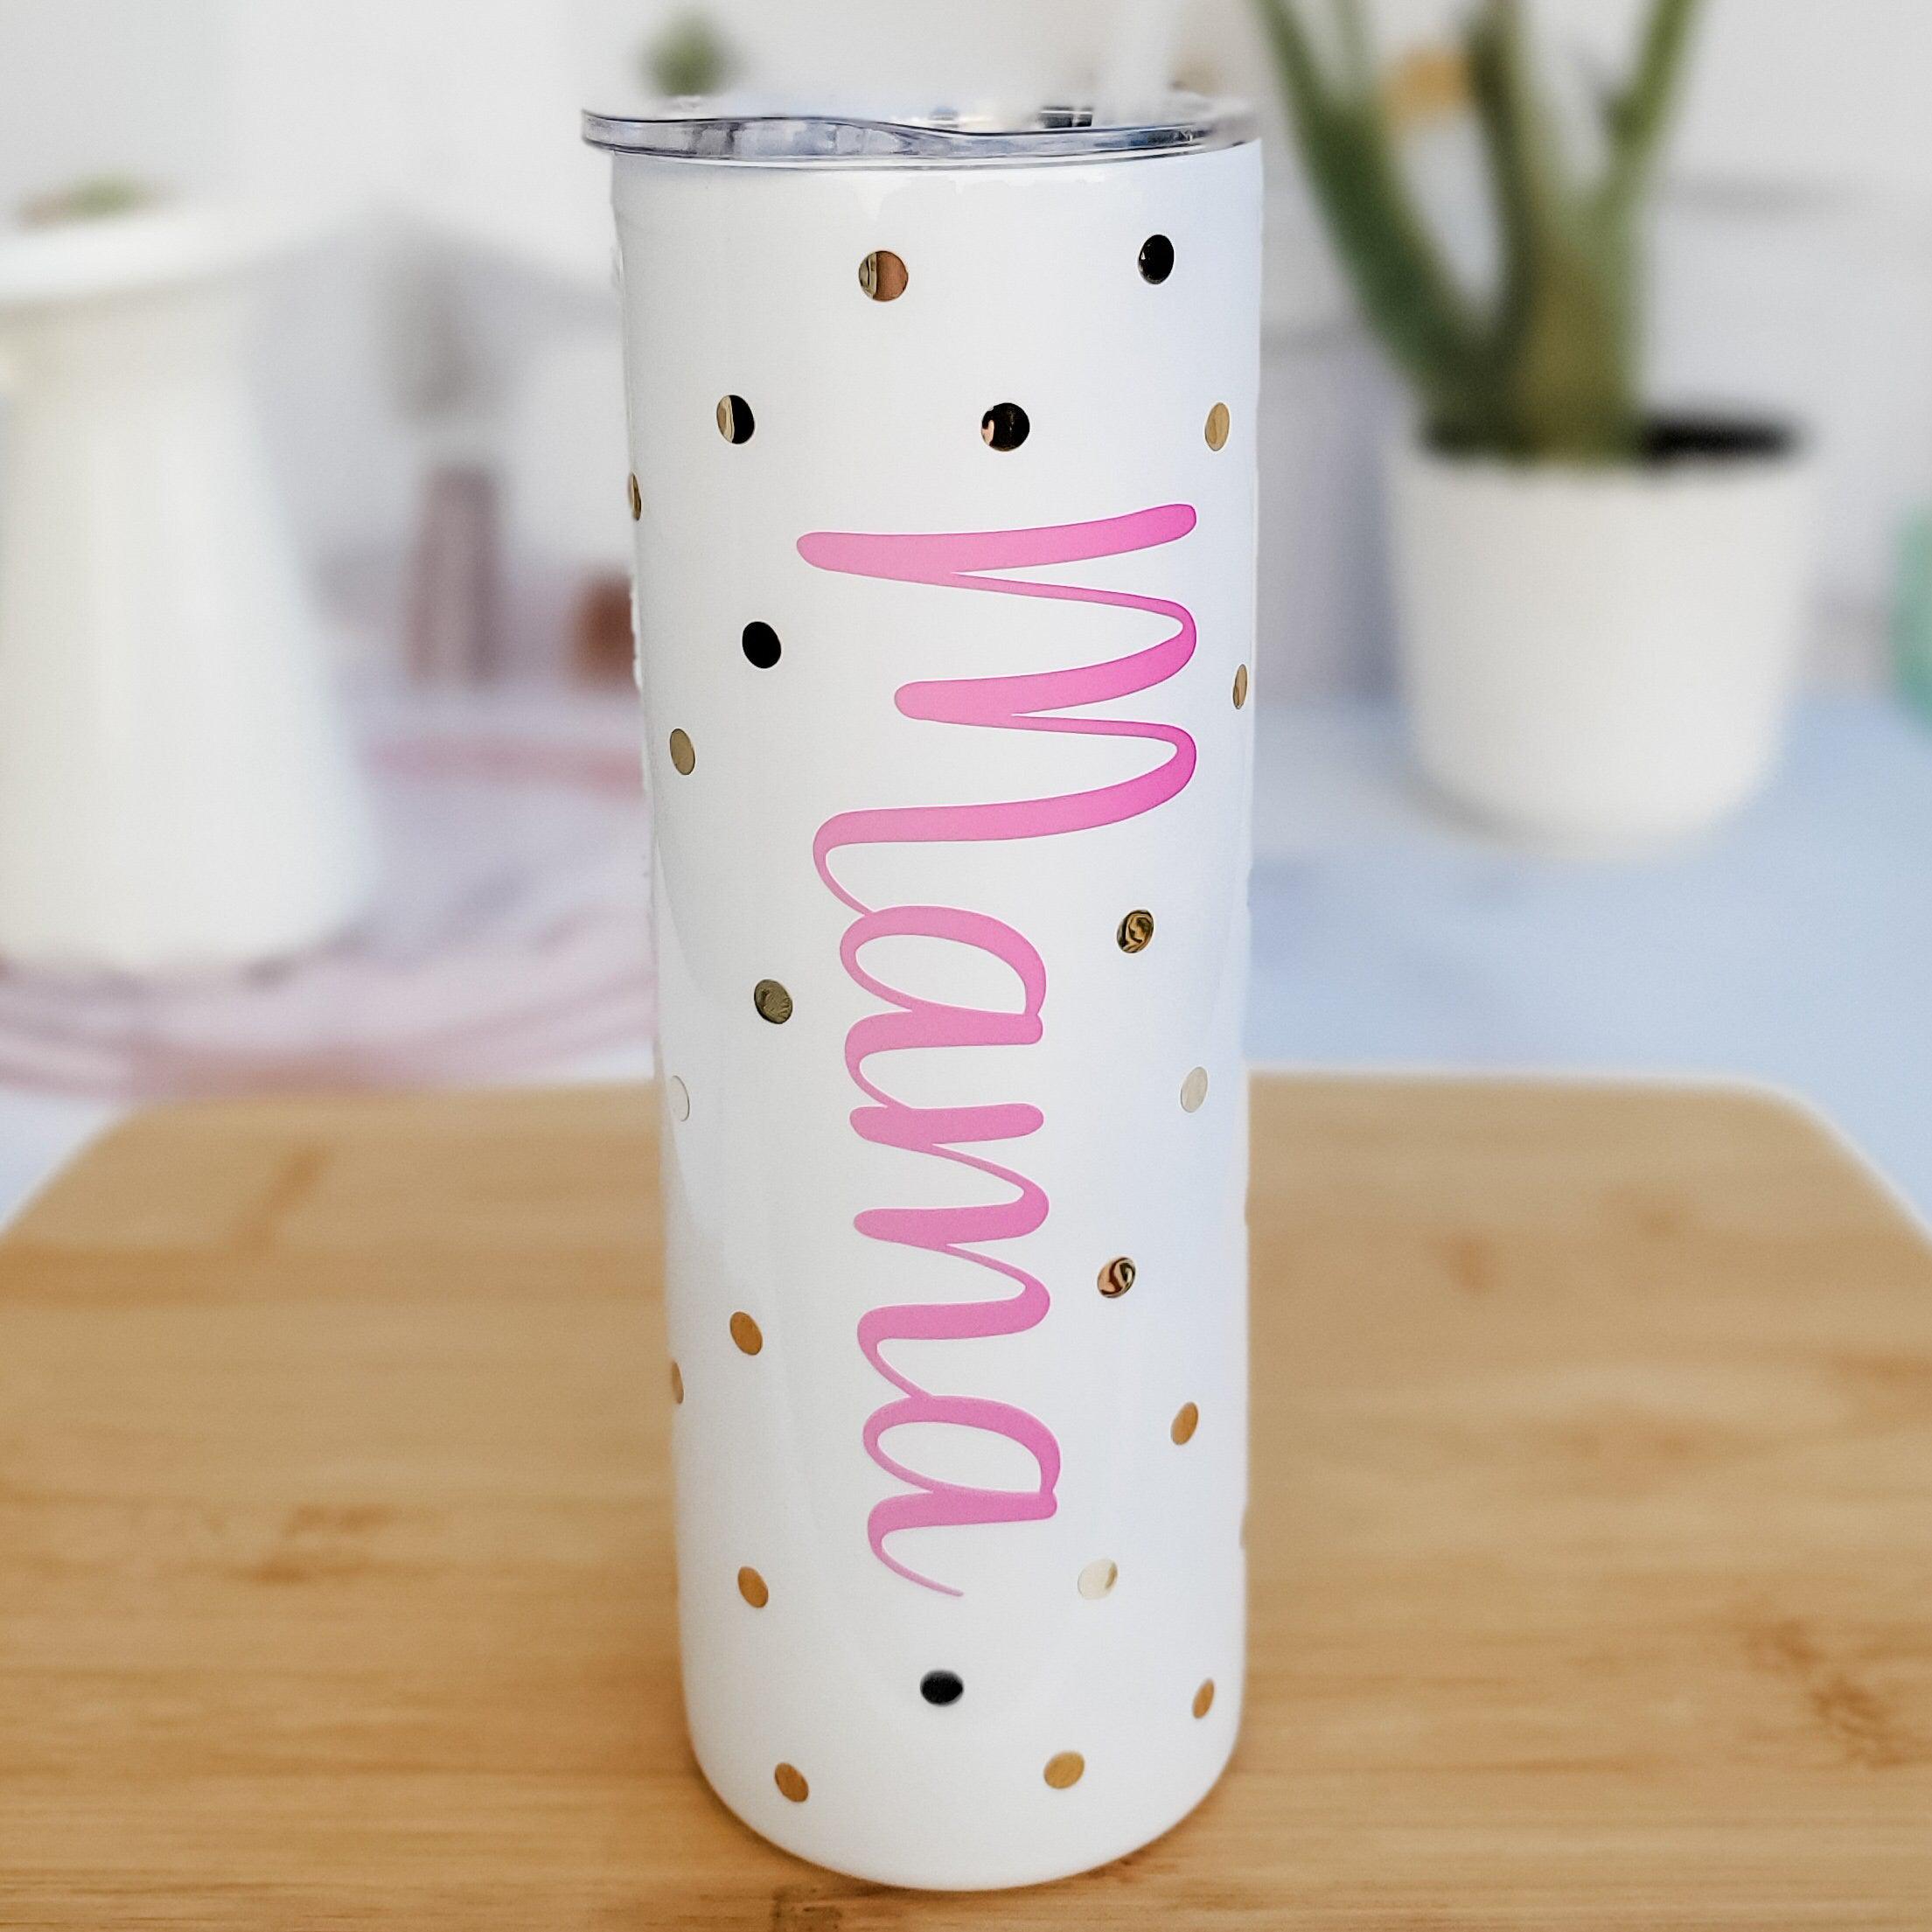 Mama and Mini Matching Insulated Tumbler Set - Color Changing Travel Cup for Baby Shower Gift - New Mom Mother's Day Gift - Mommy and Me Cup